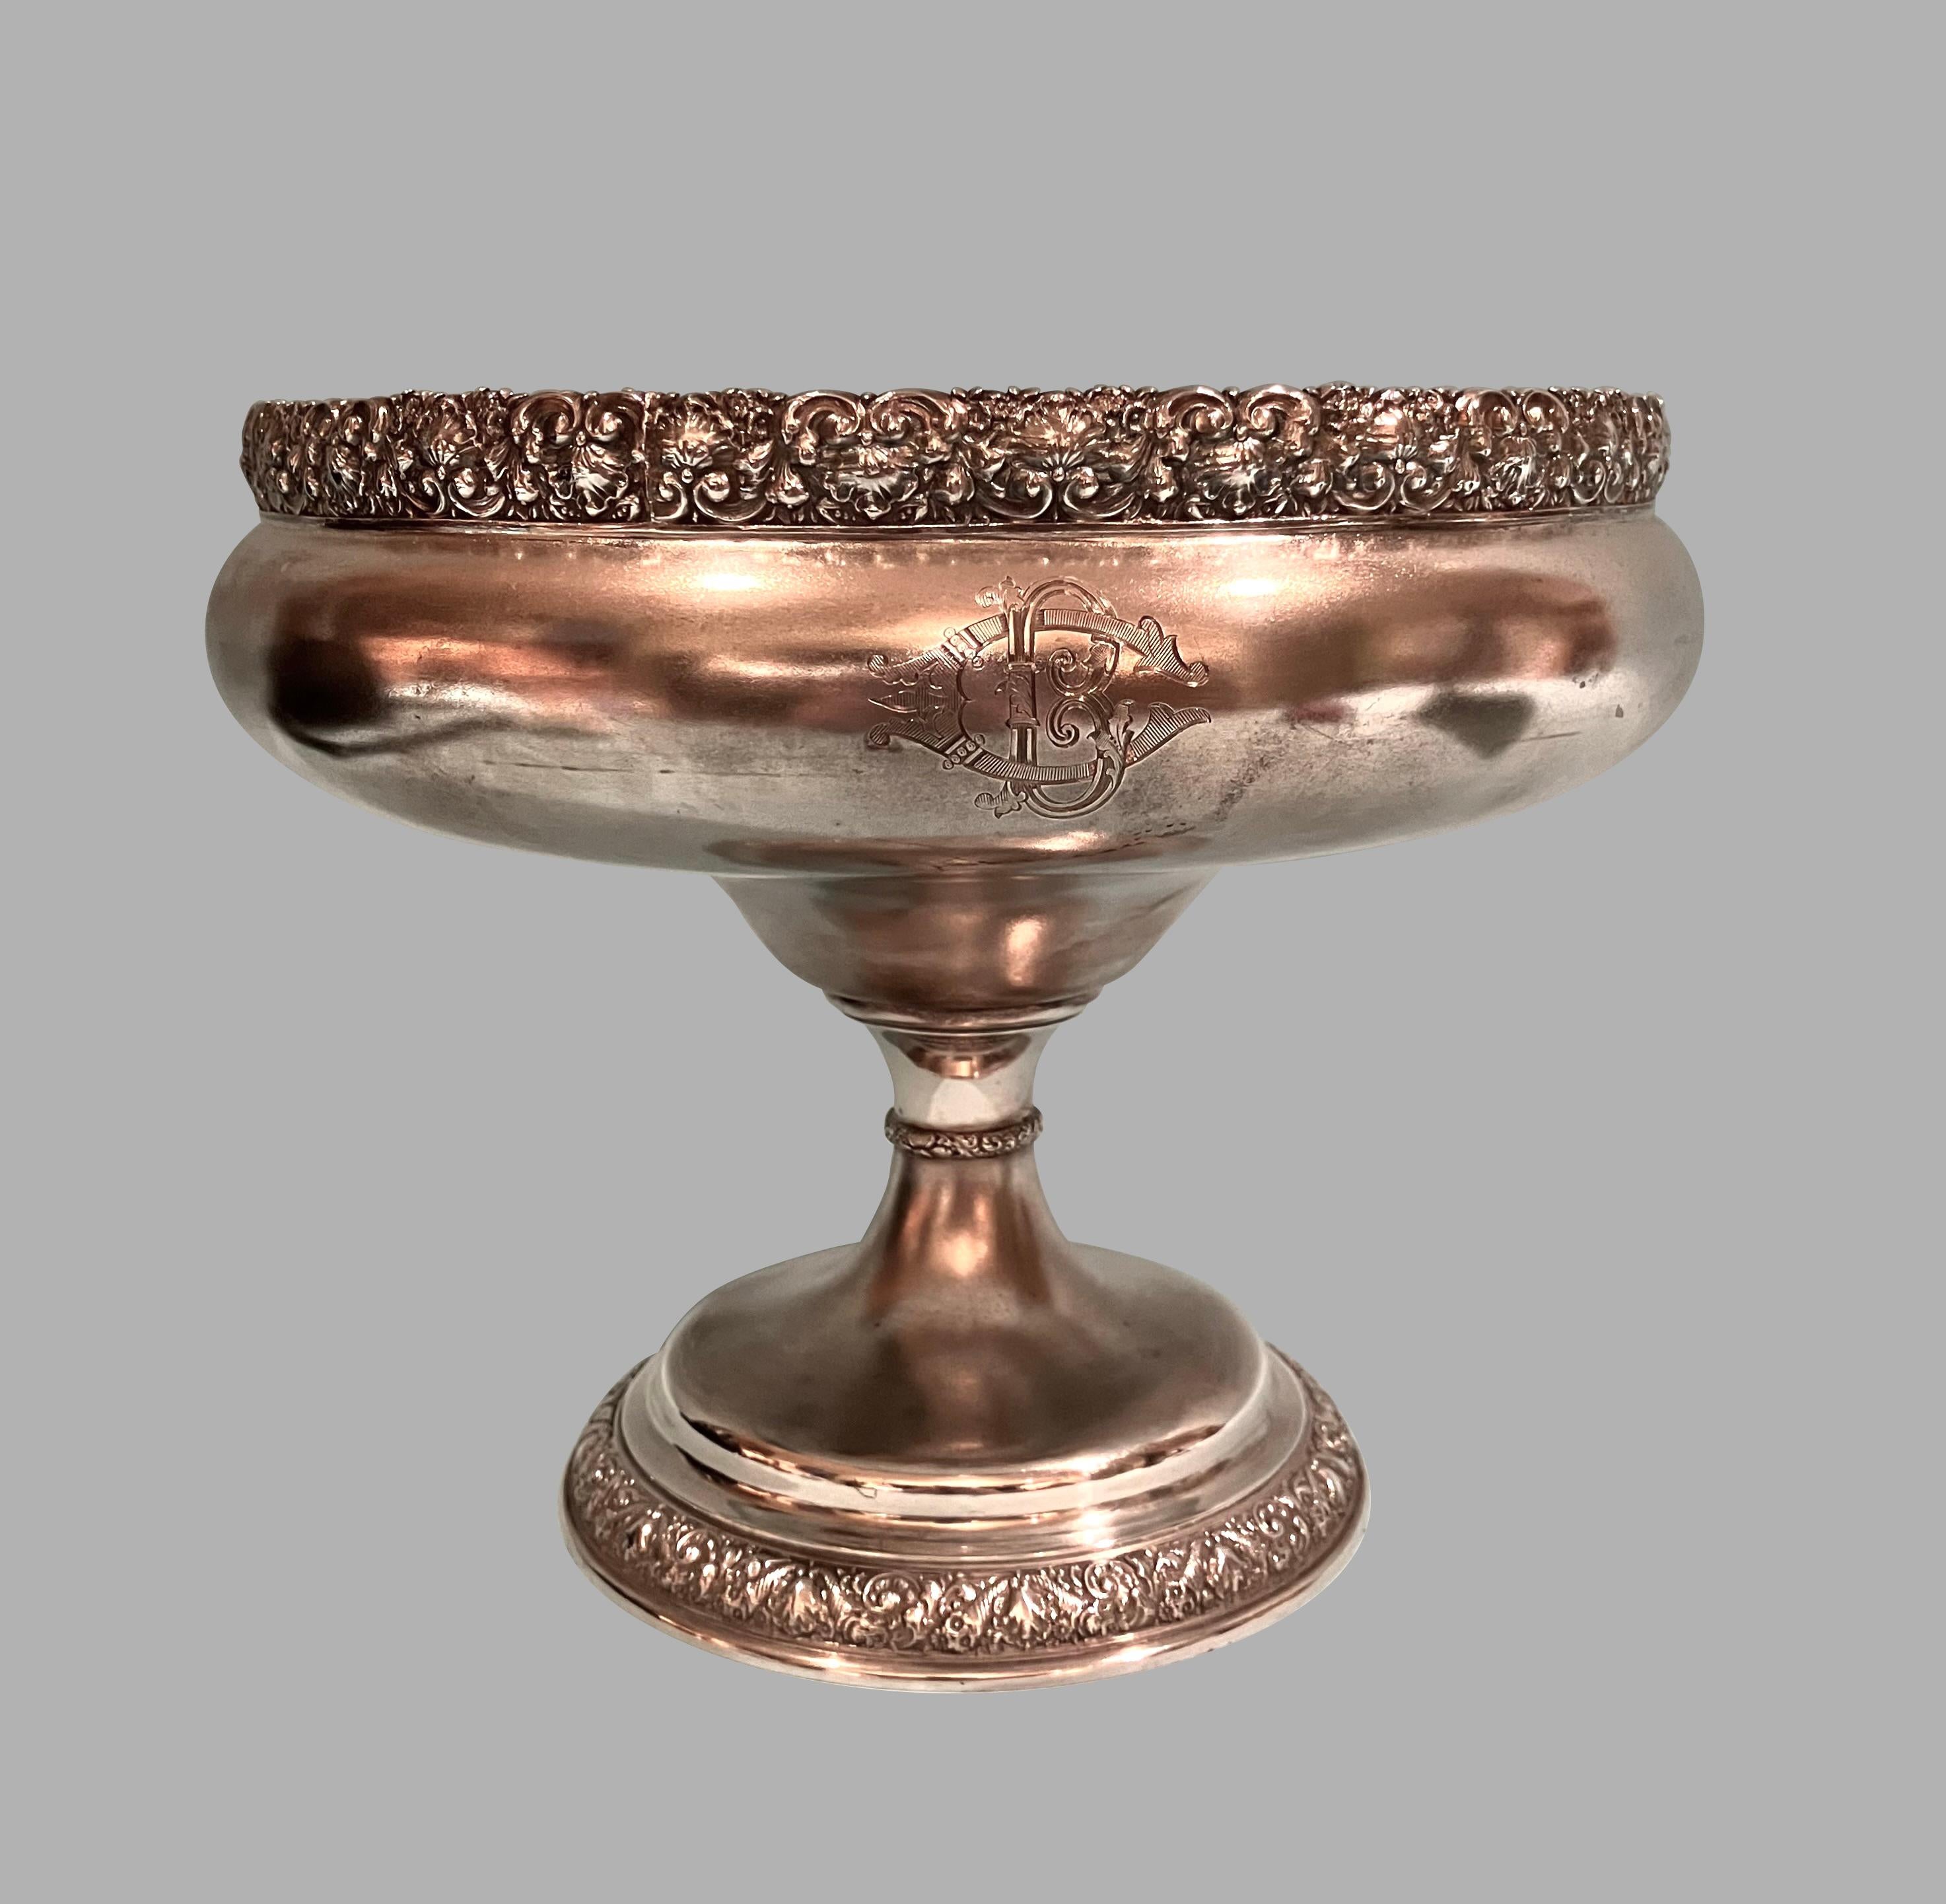 Victorian  Tiffany Gilt-Washed Sterling Silver Center Bowl Circa 1873-1891